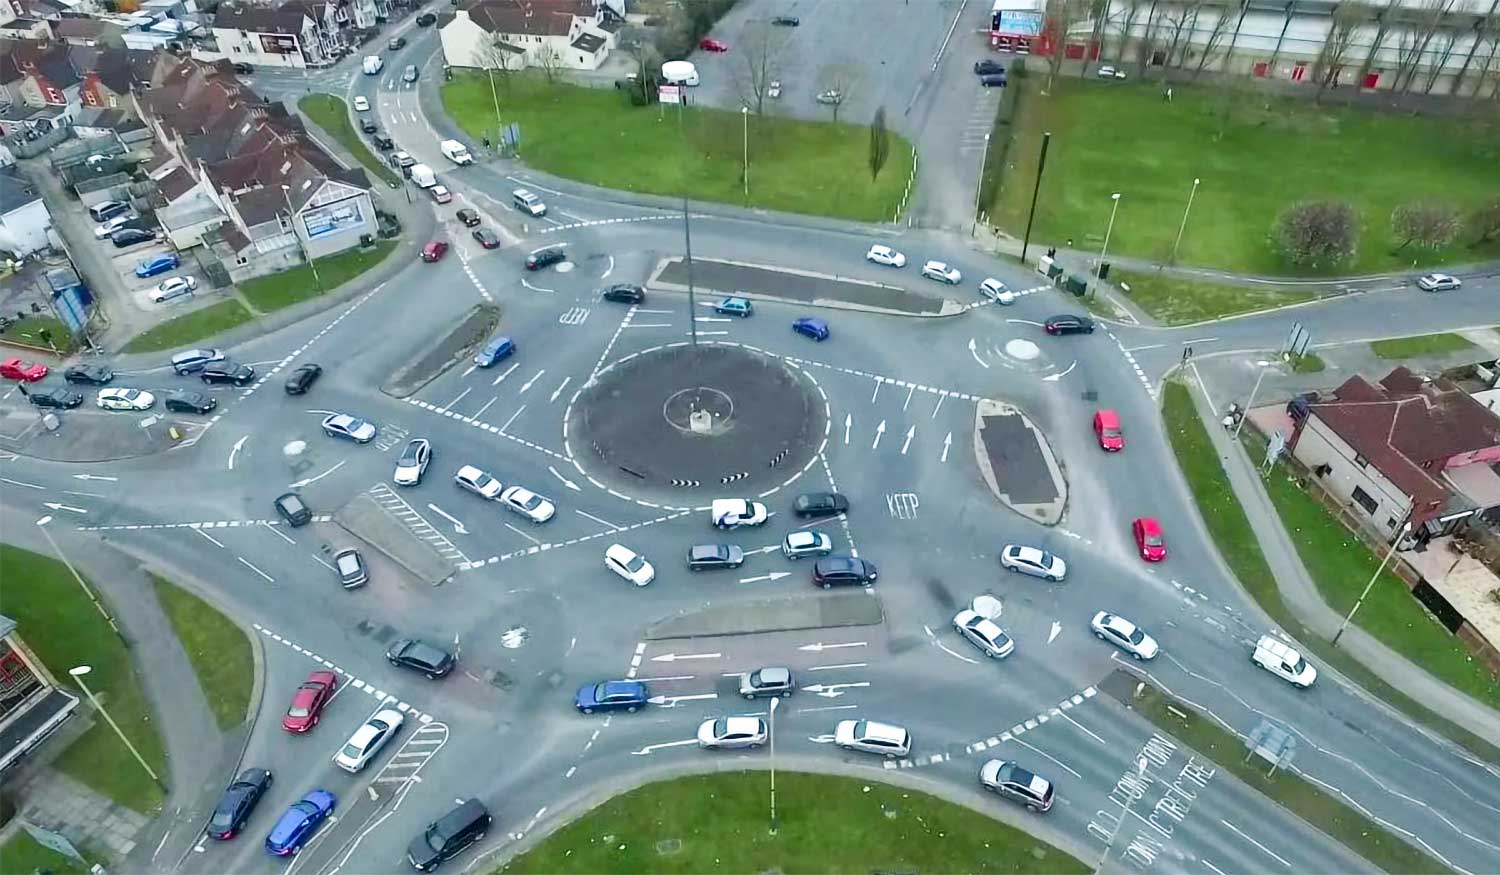 Roundabouts can be pretty confusing, especially in the midst of heavy traffic. How clear is your faith journey?